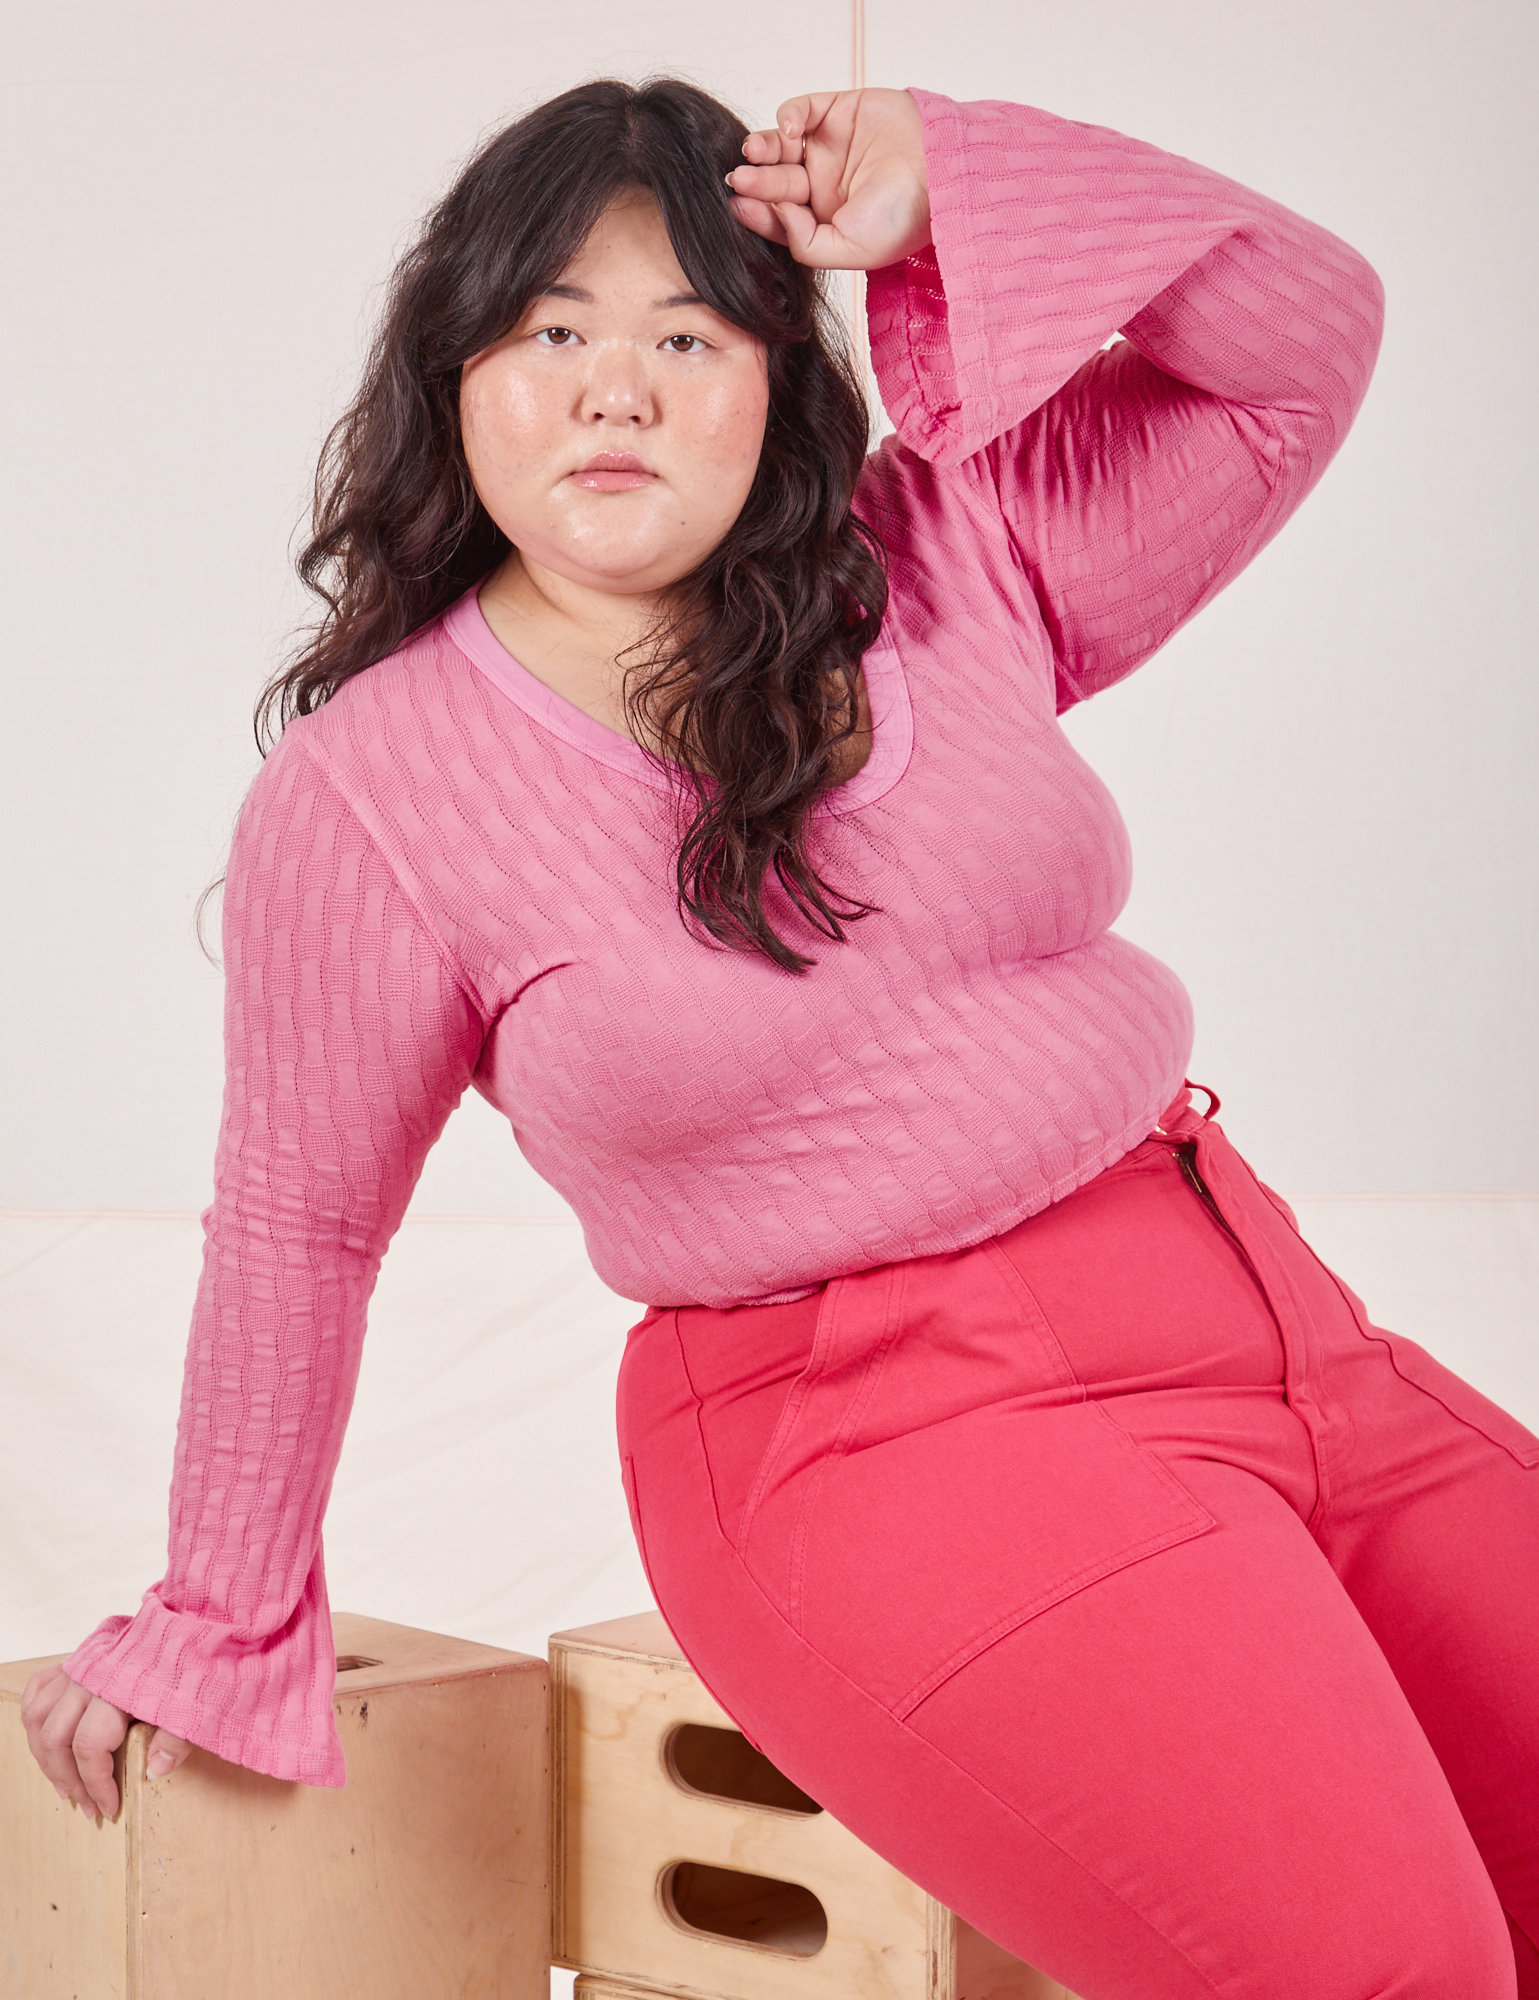 Ashley is wearing Bell Sleeve Top in Bubblegum Pink and hot pink Work Pants